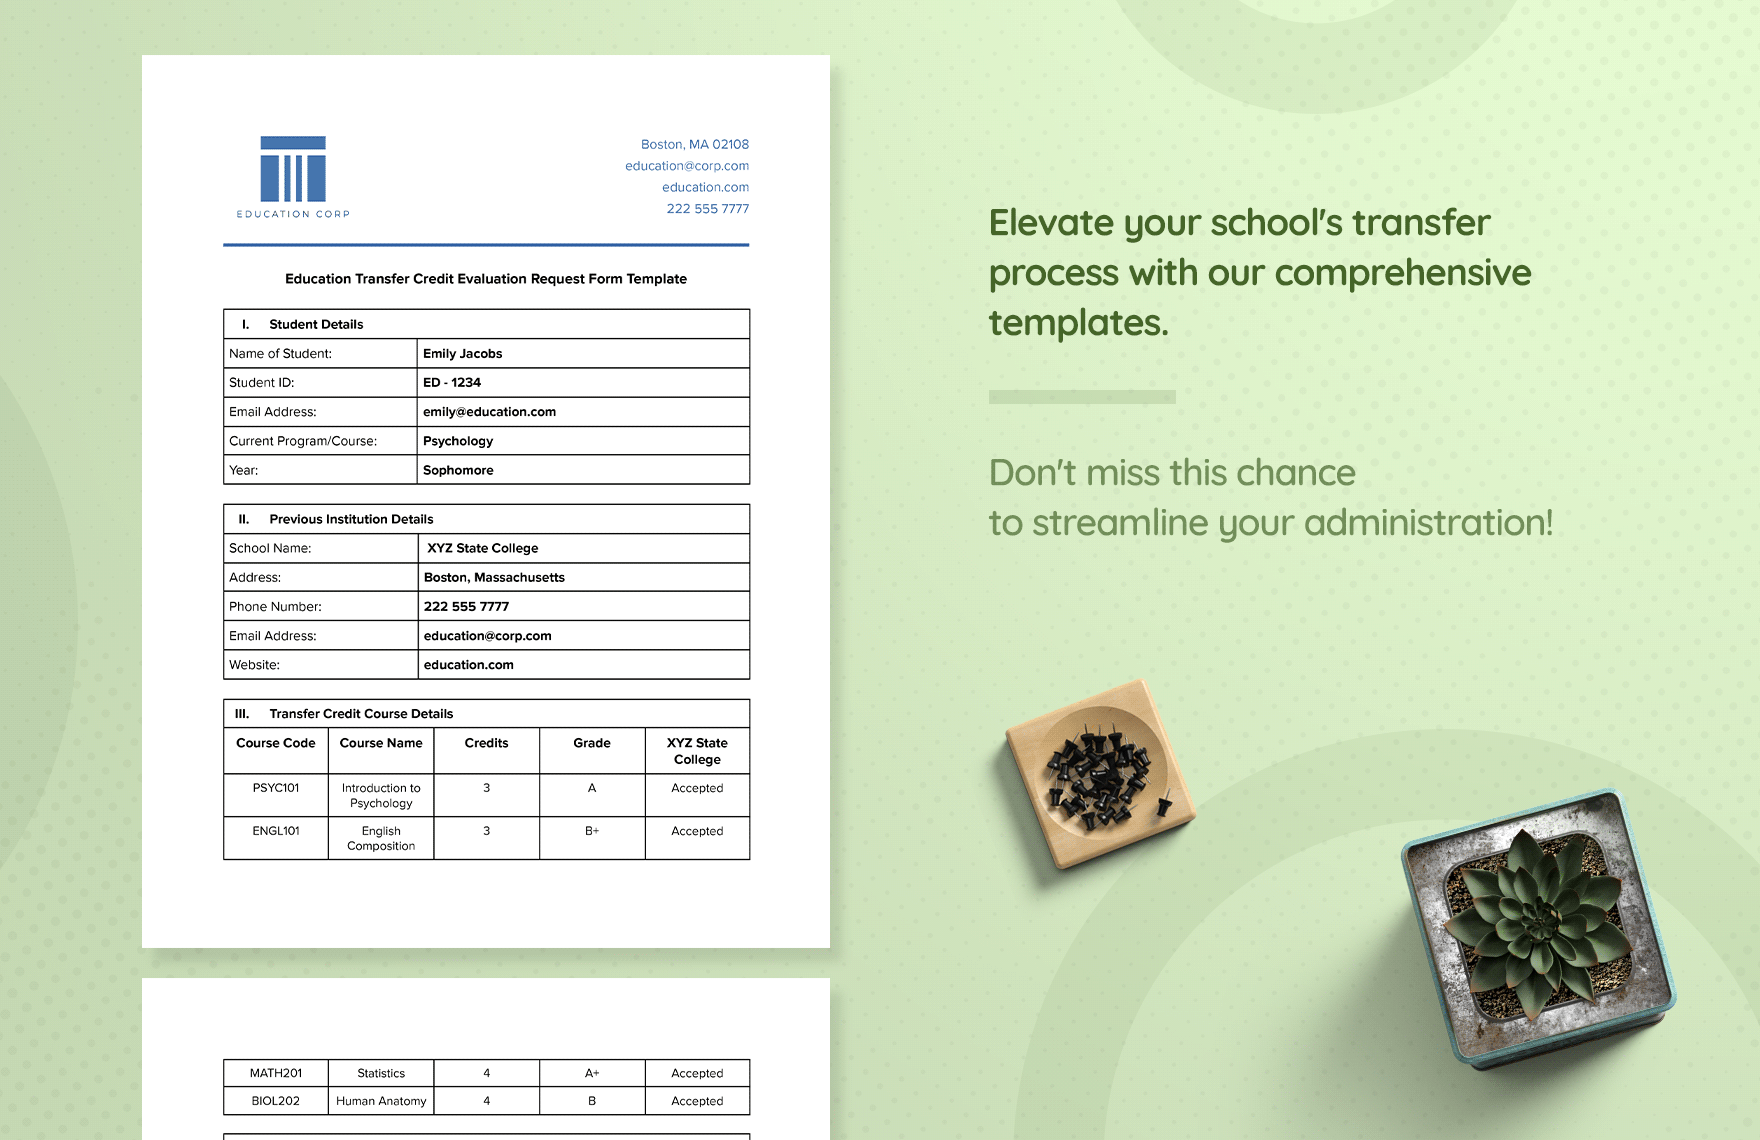 Education Transfer Credit Evaluation Request Form Template